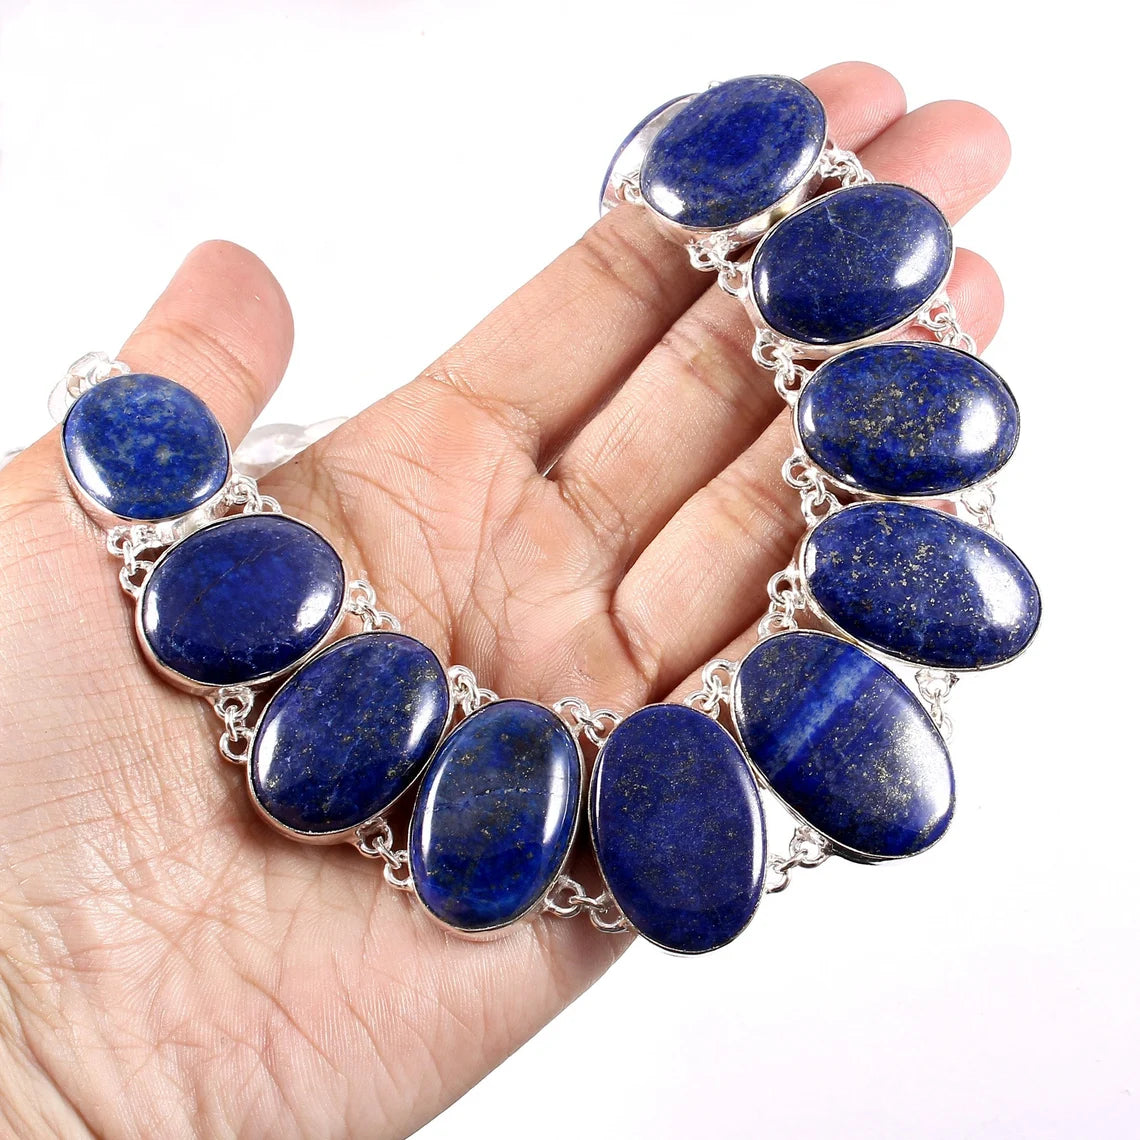 Lapis Lazuli Riviere Necklace For Women - 925 Solid Sterling Silver Necklace